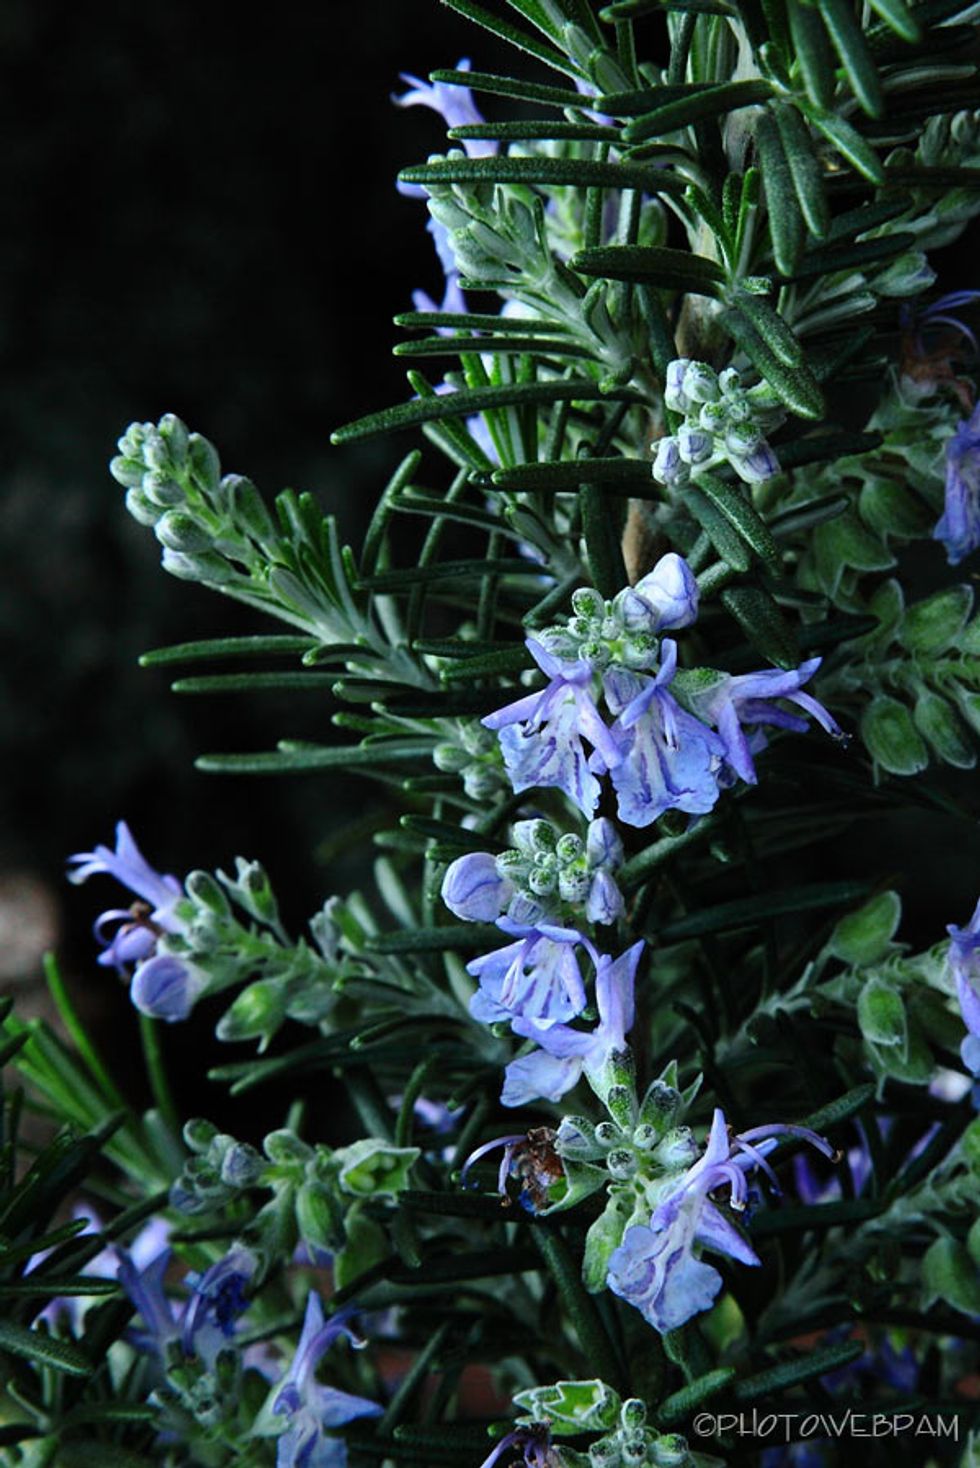 Rosemary makes hair beautiful and is good for health